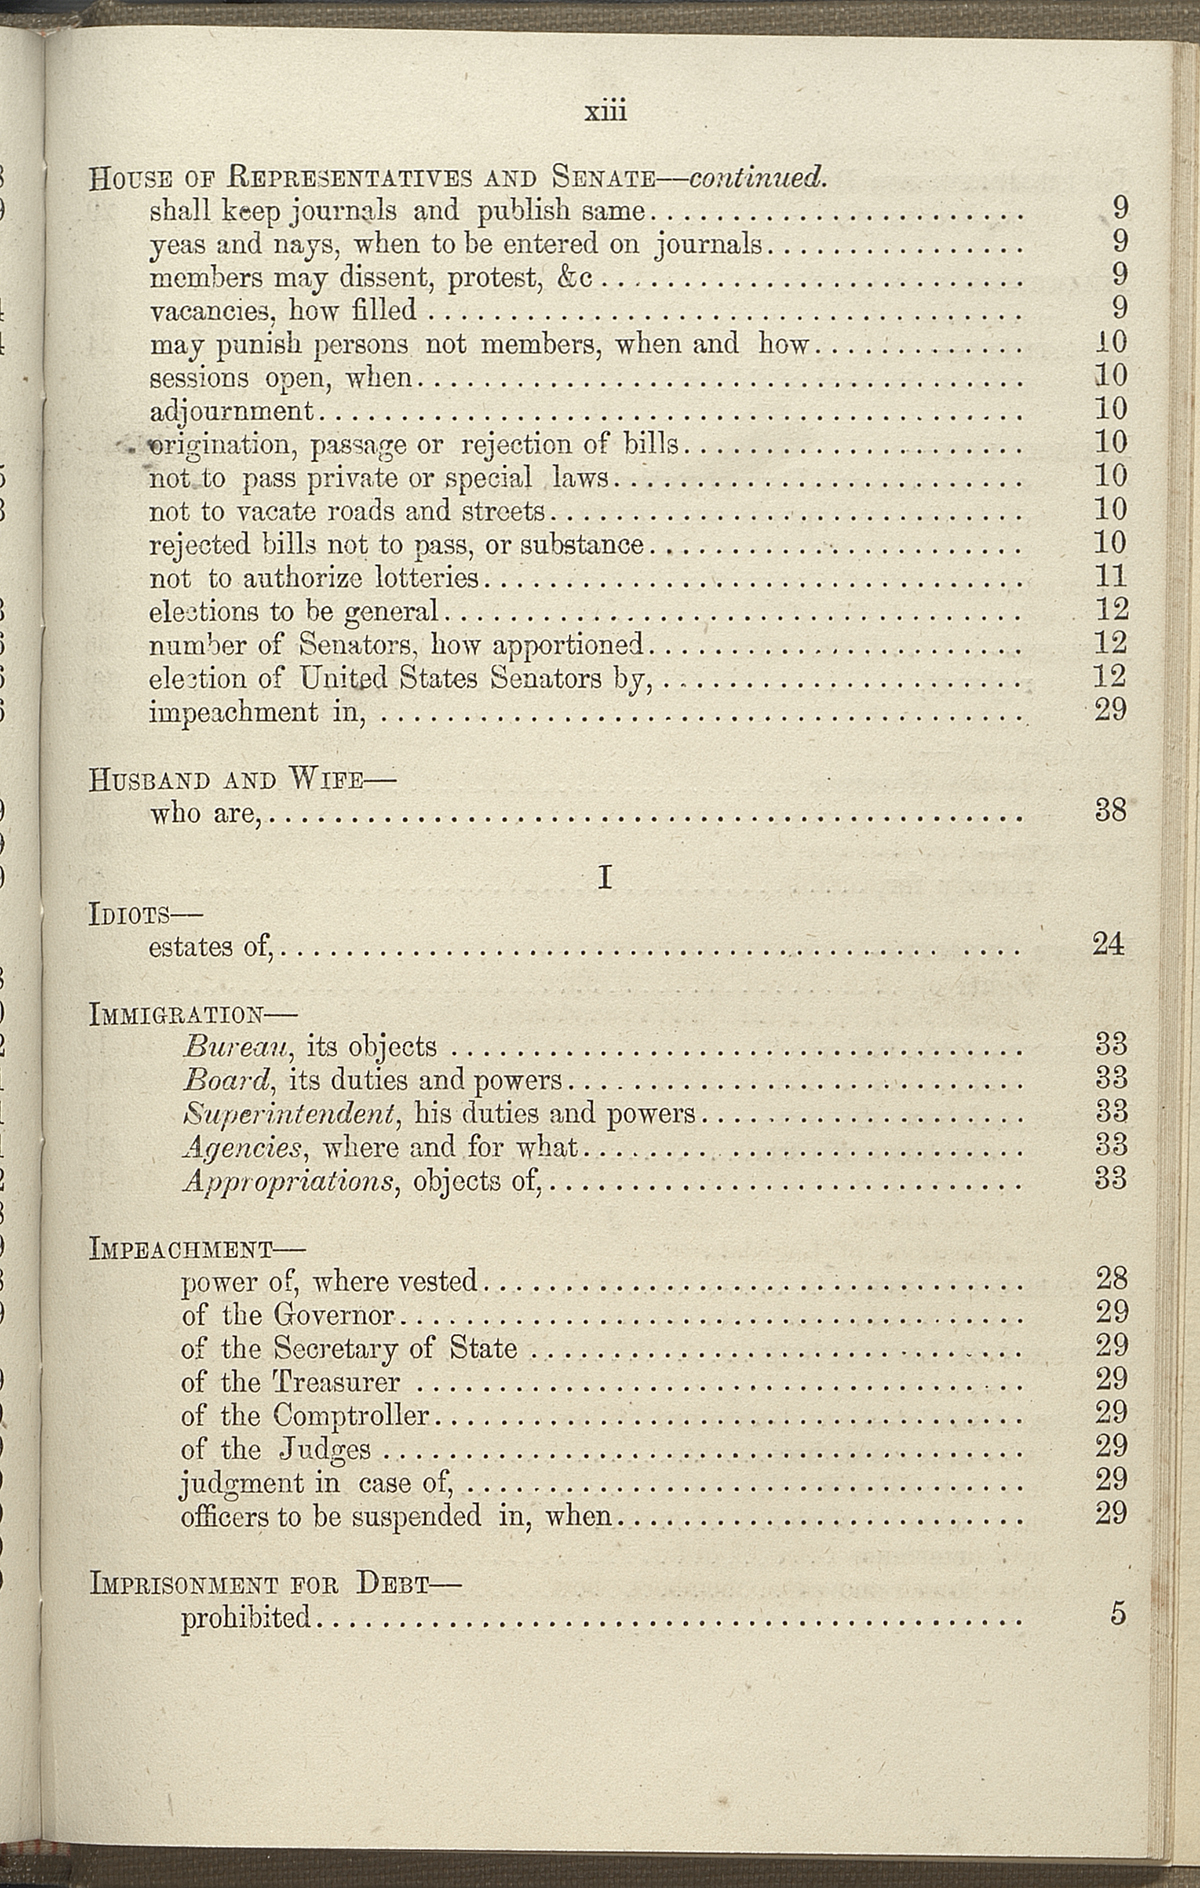 page 13 - 1869 index